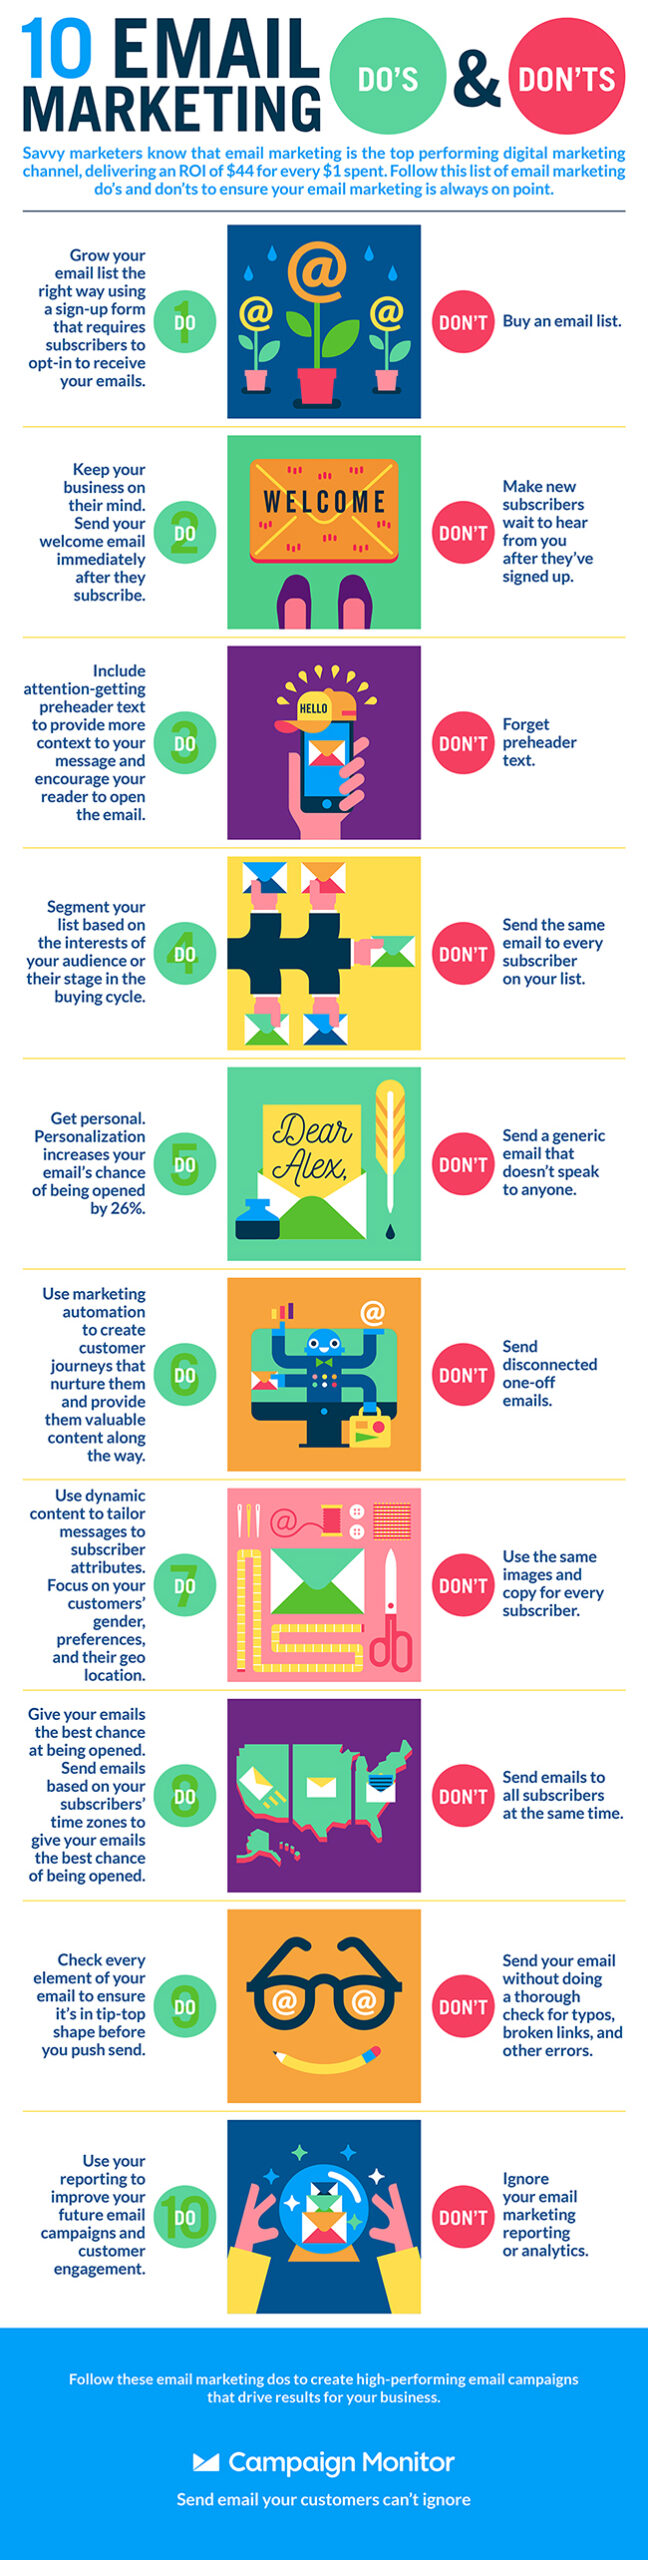 20 email marketing dos and donts for more effective email campaigns infographic scaled